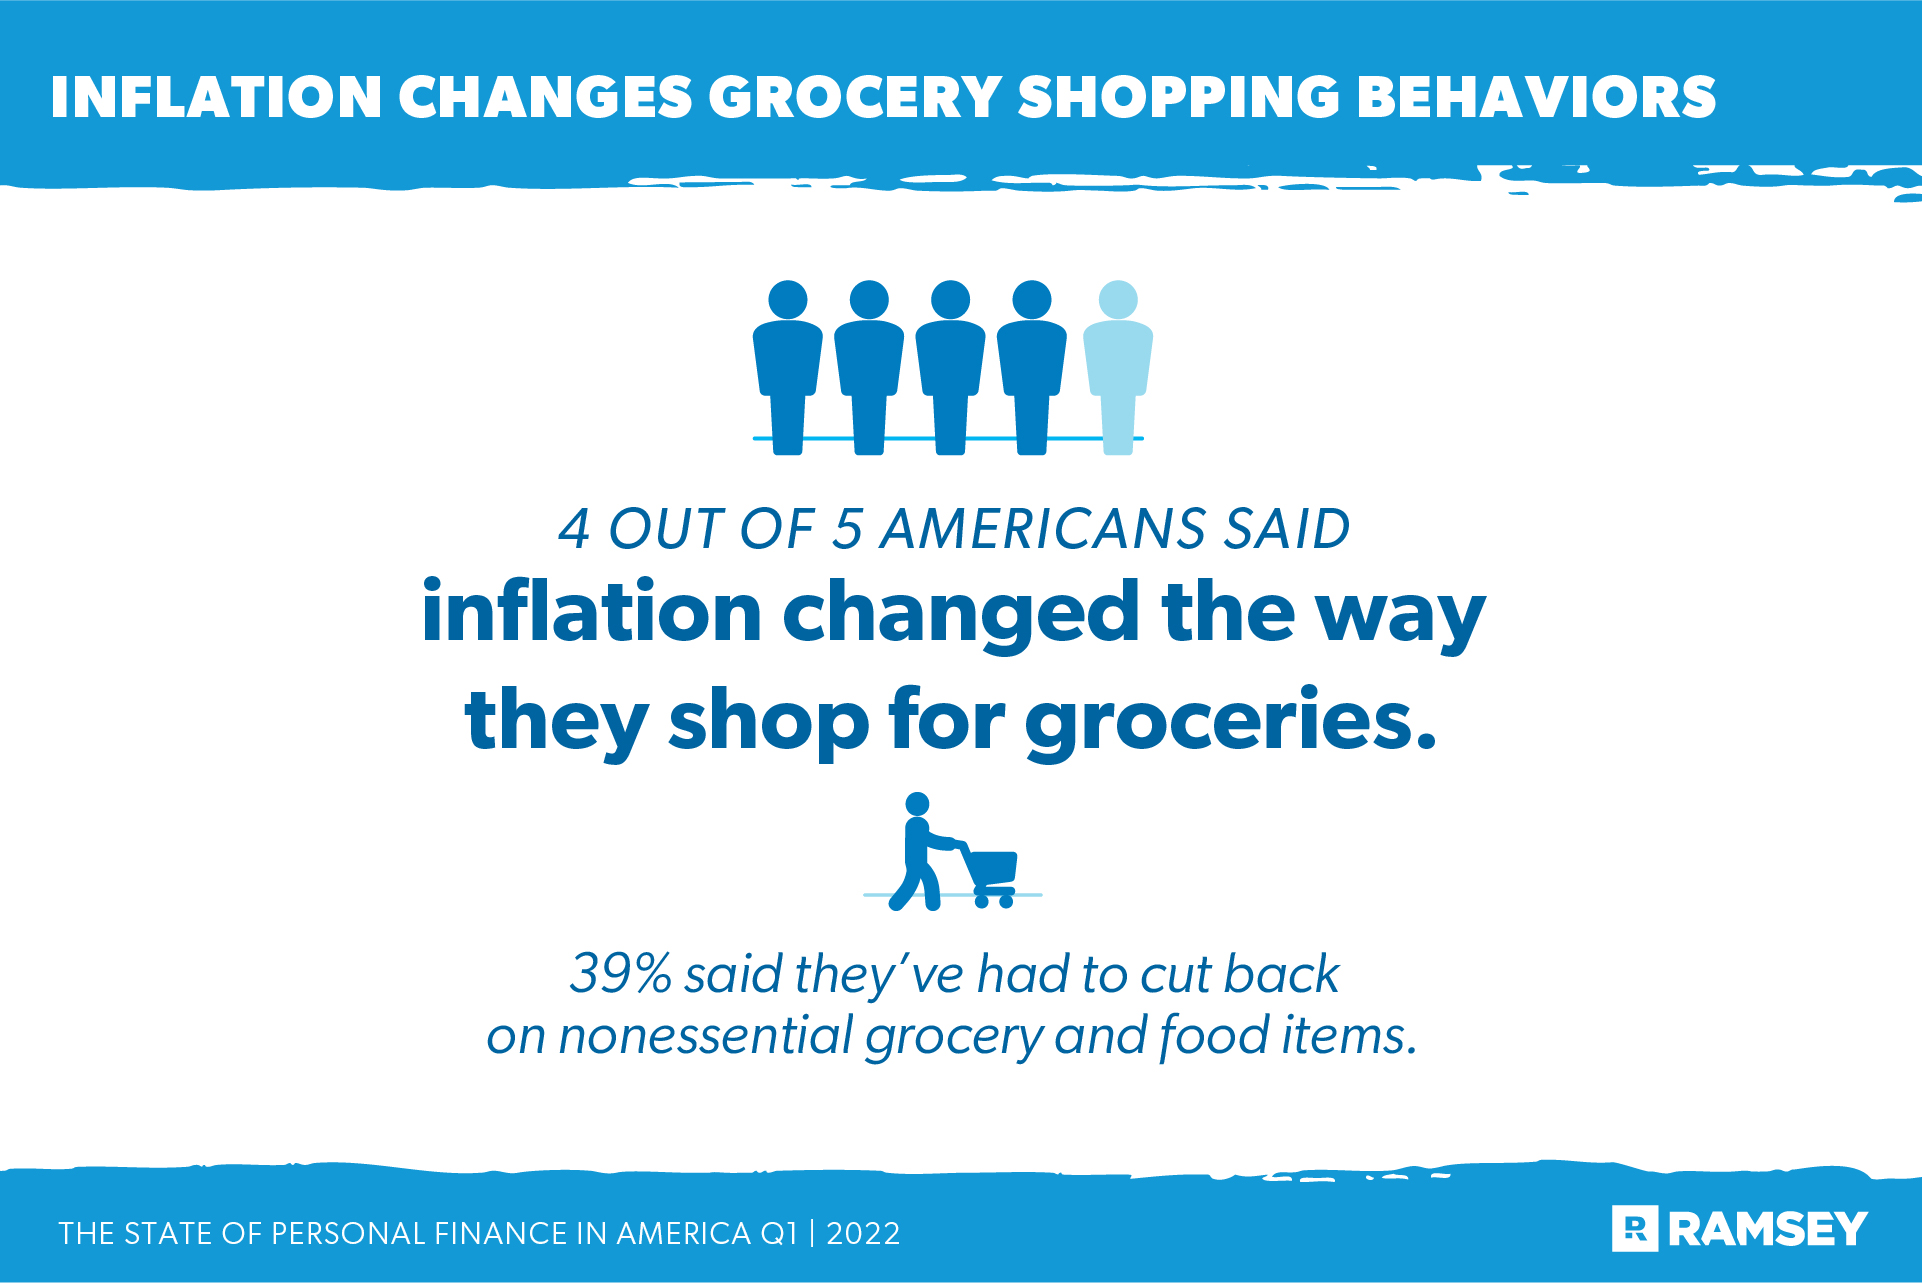 Inflation changes grocery shopping behaviors